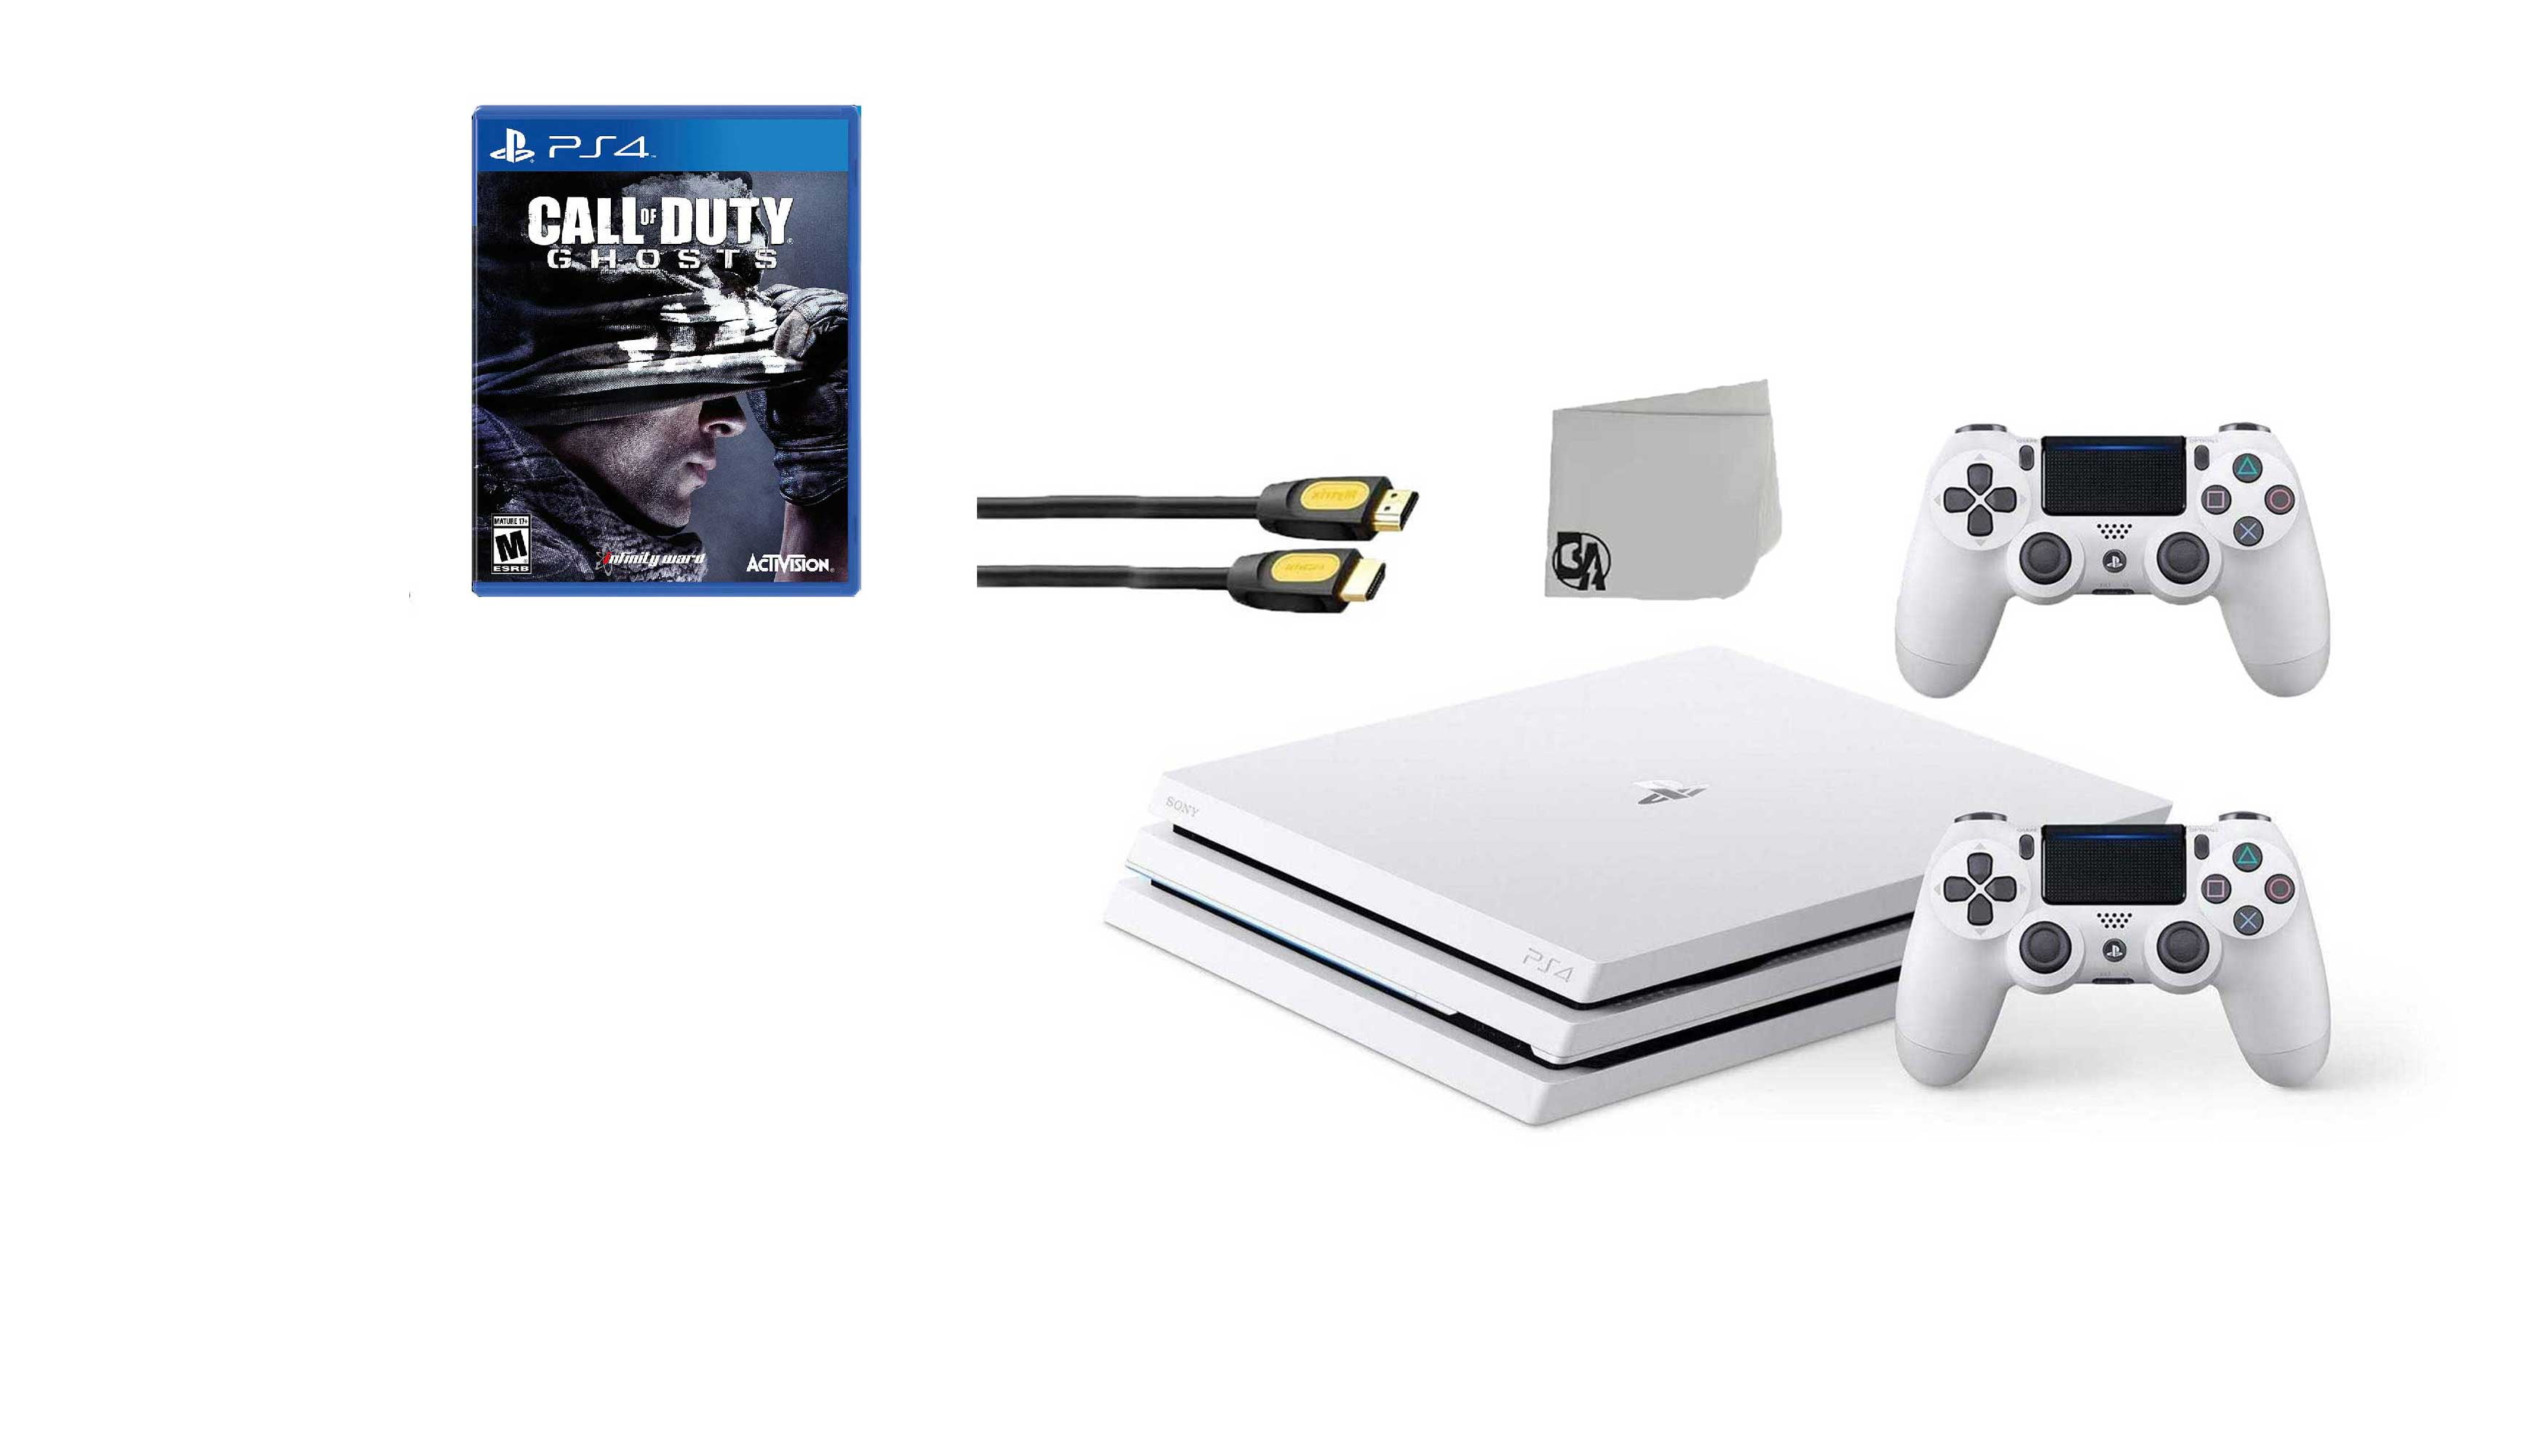 Sony PlayStation 4 Pro Glacier 1TB Gaming Consol White 2 Controller Included with Call of Duty Ghosts BOLT AXTION Bundle New - Walmart.com